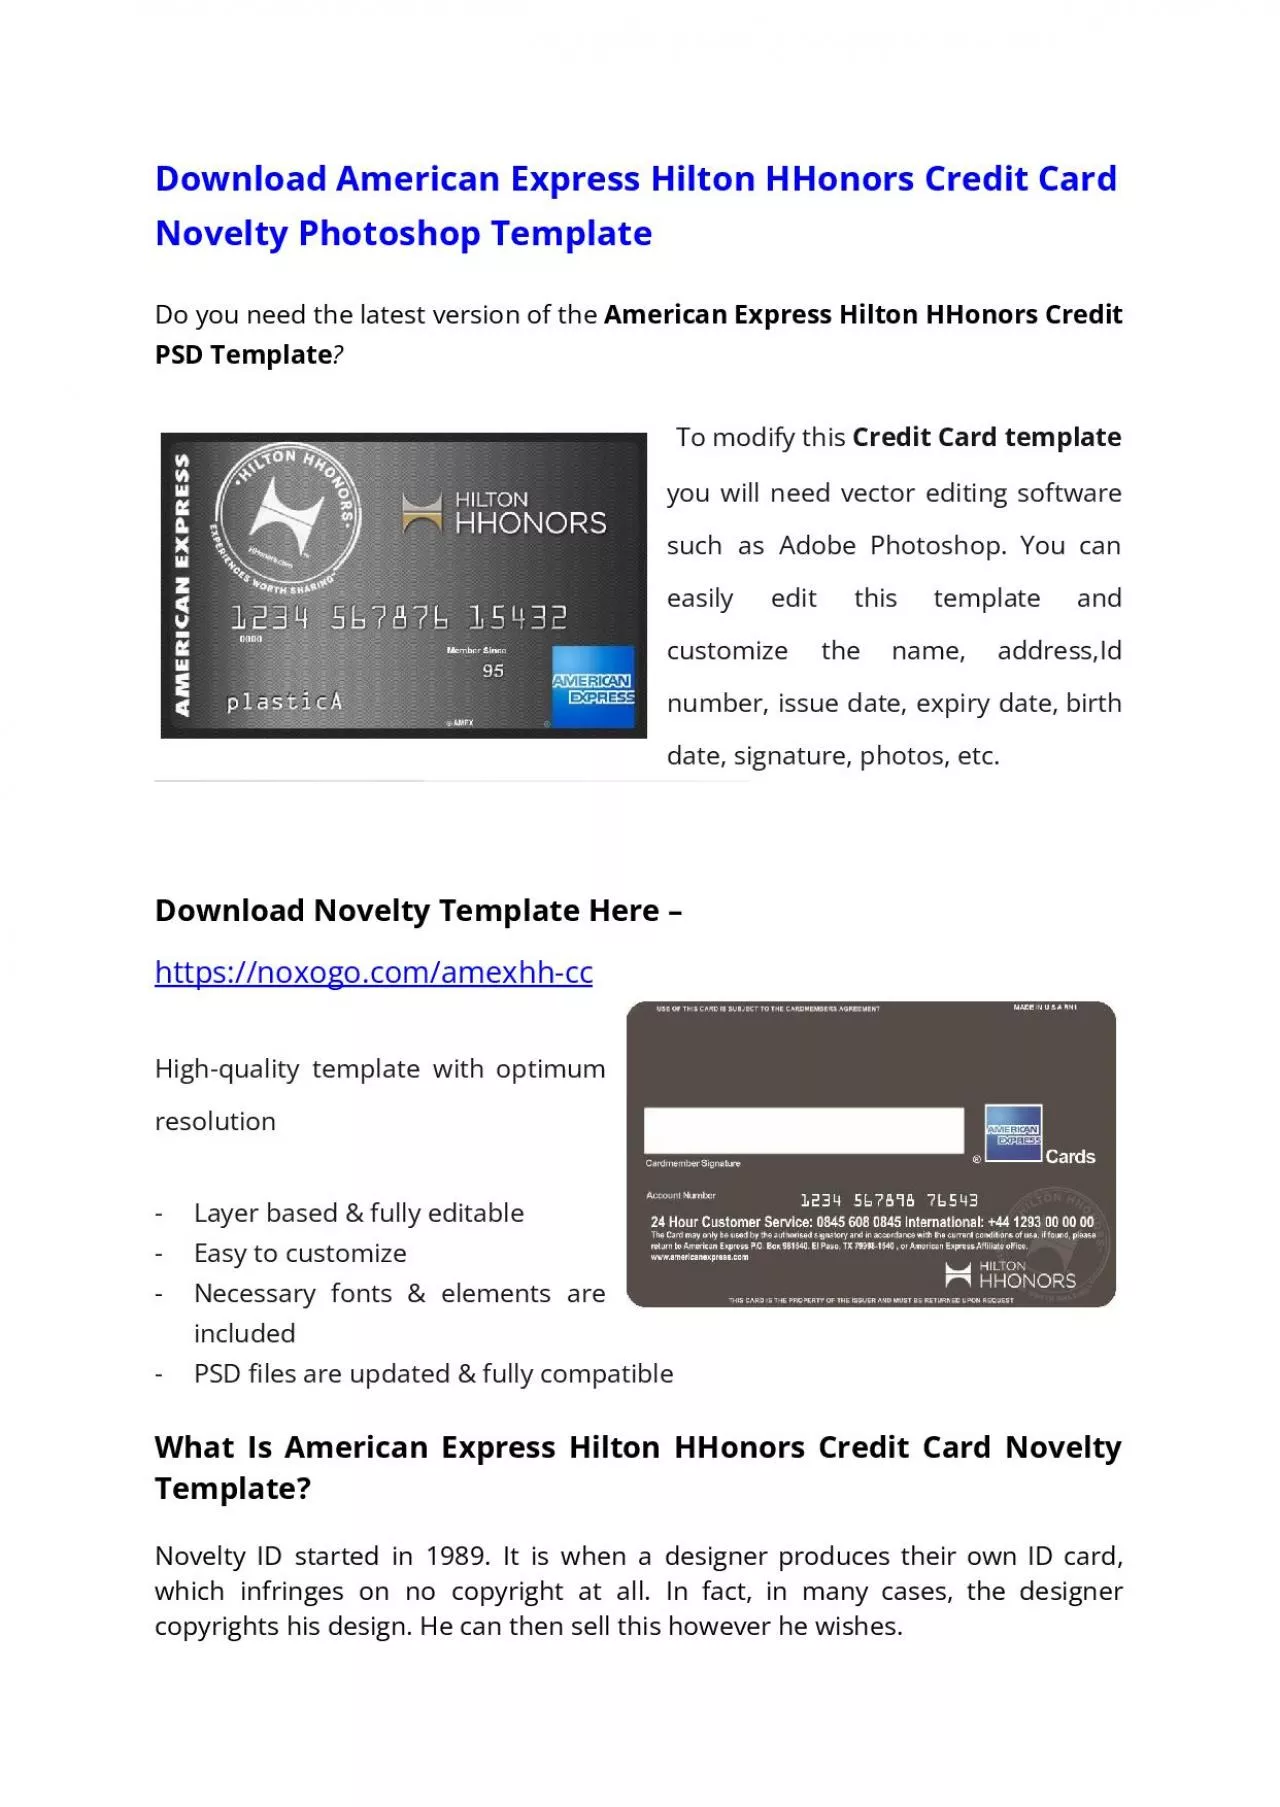 American Express Hilton HHonors Credit Card PSD Template – Download Photoshop File